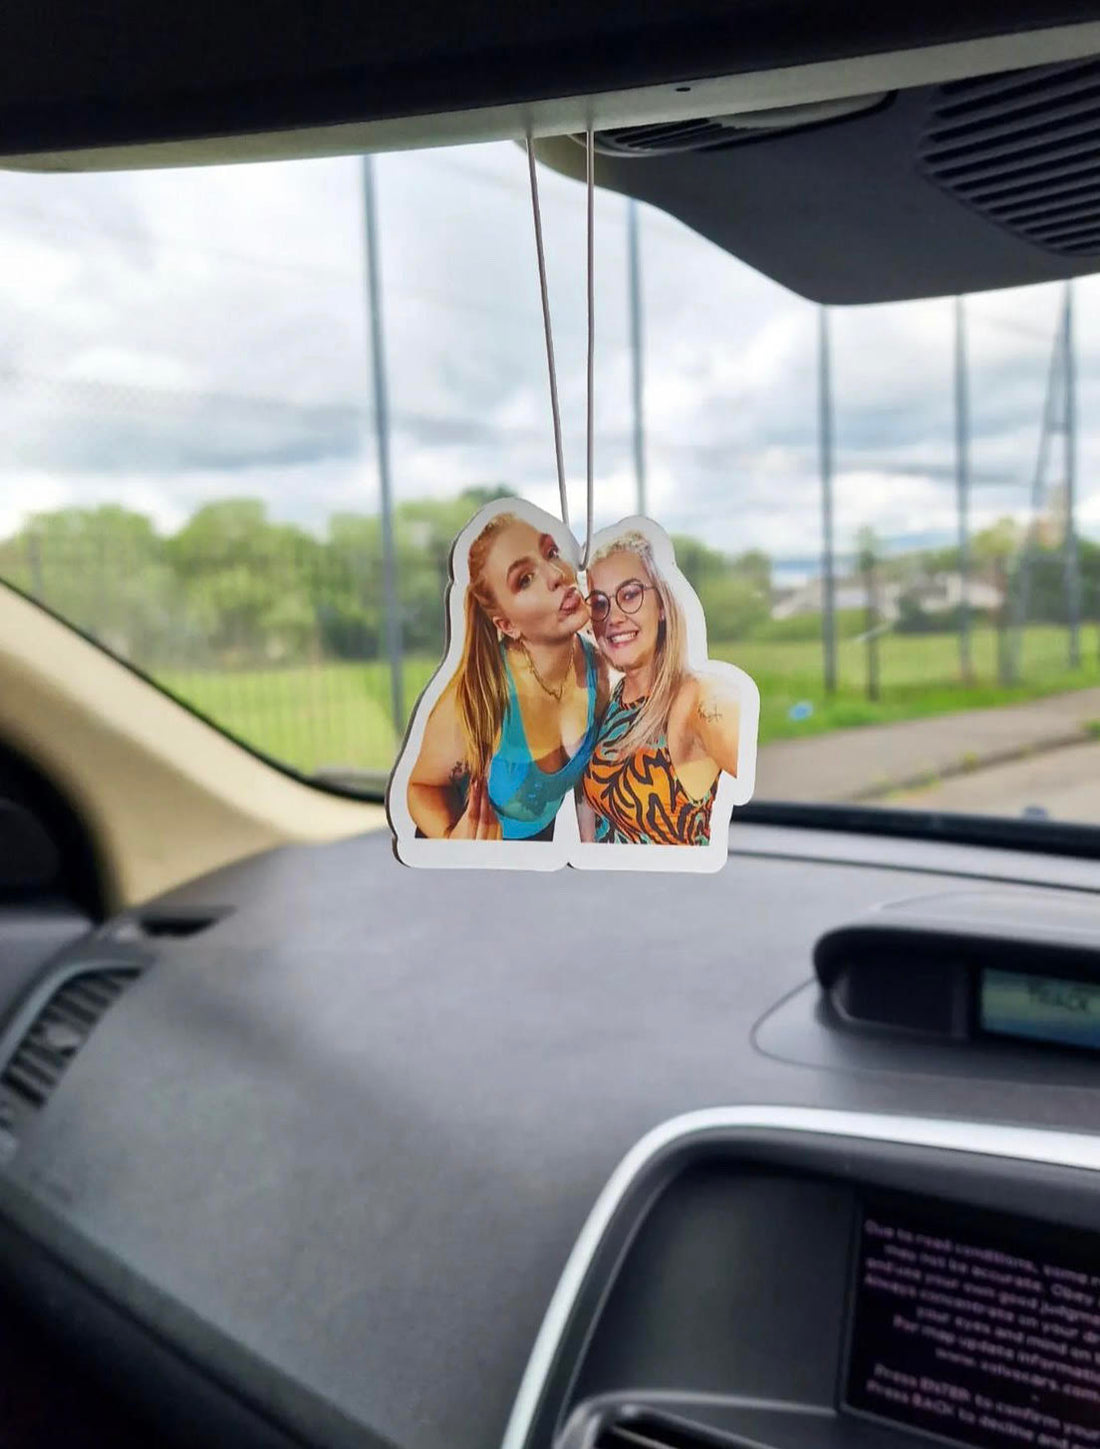 Customer Showcase: Heartwarming Stories Behind Our Personalized Car Air Fresheners